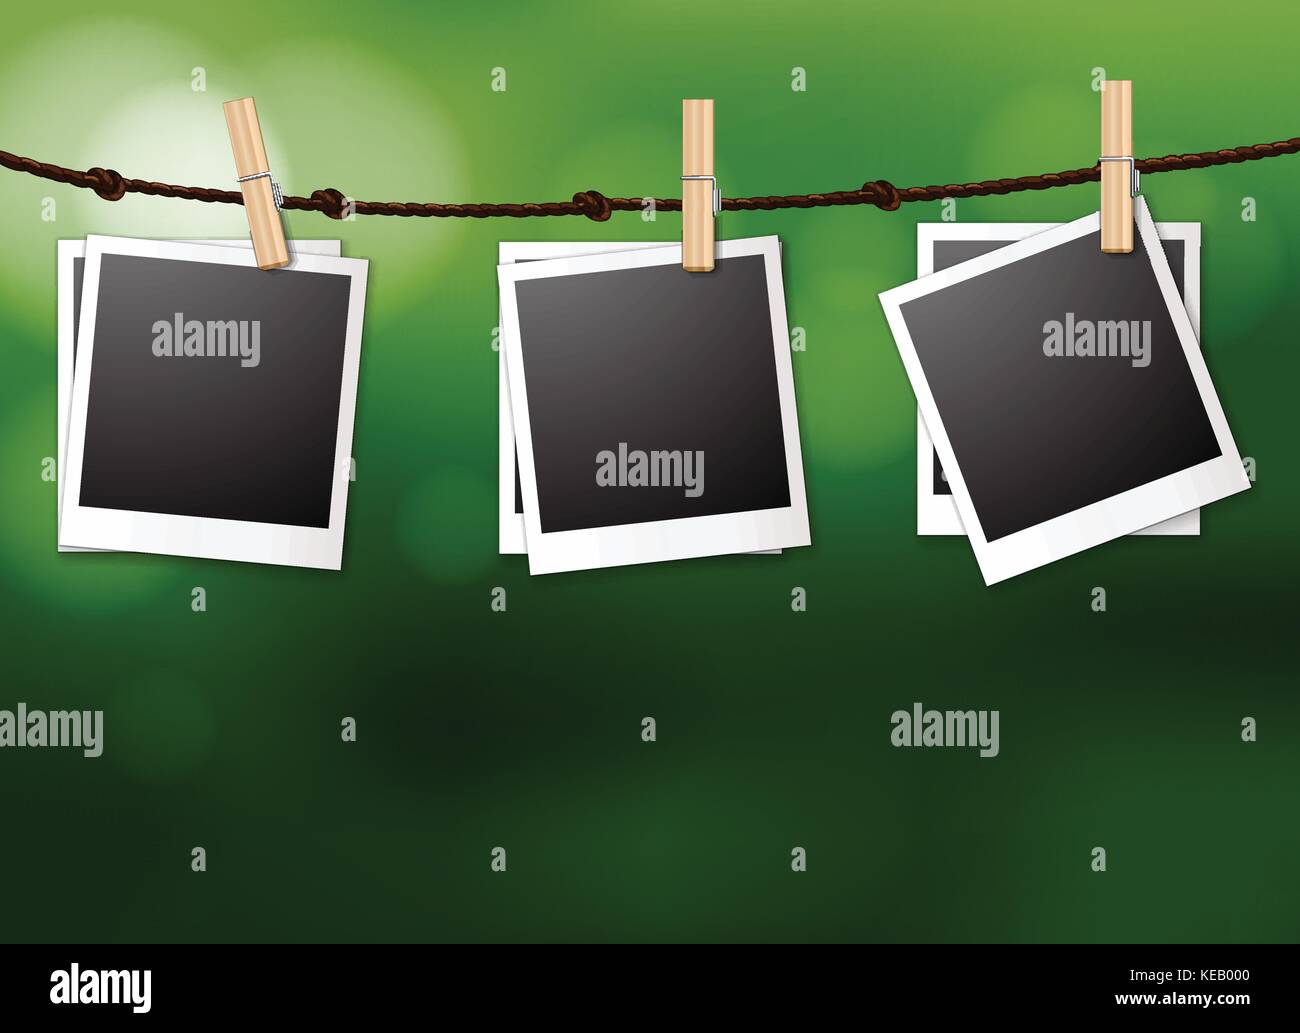 Illustration of photo frames hanging on a wire Stock Vector